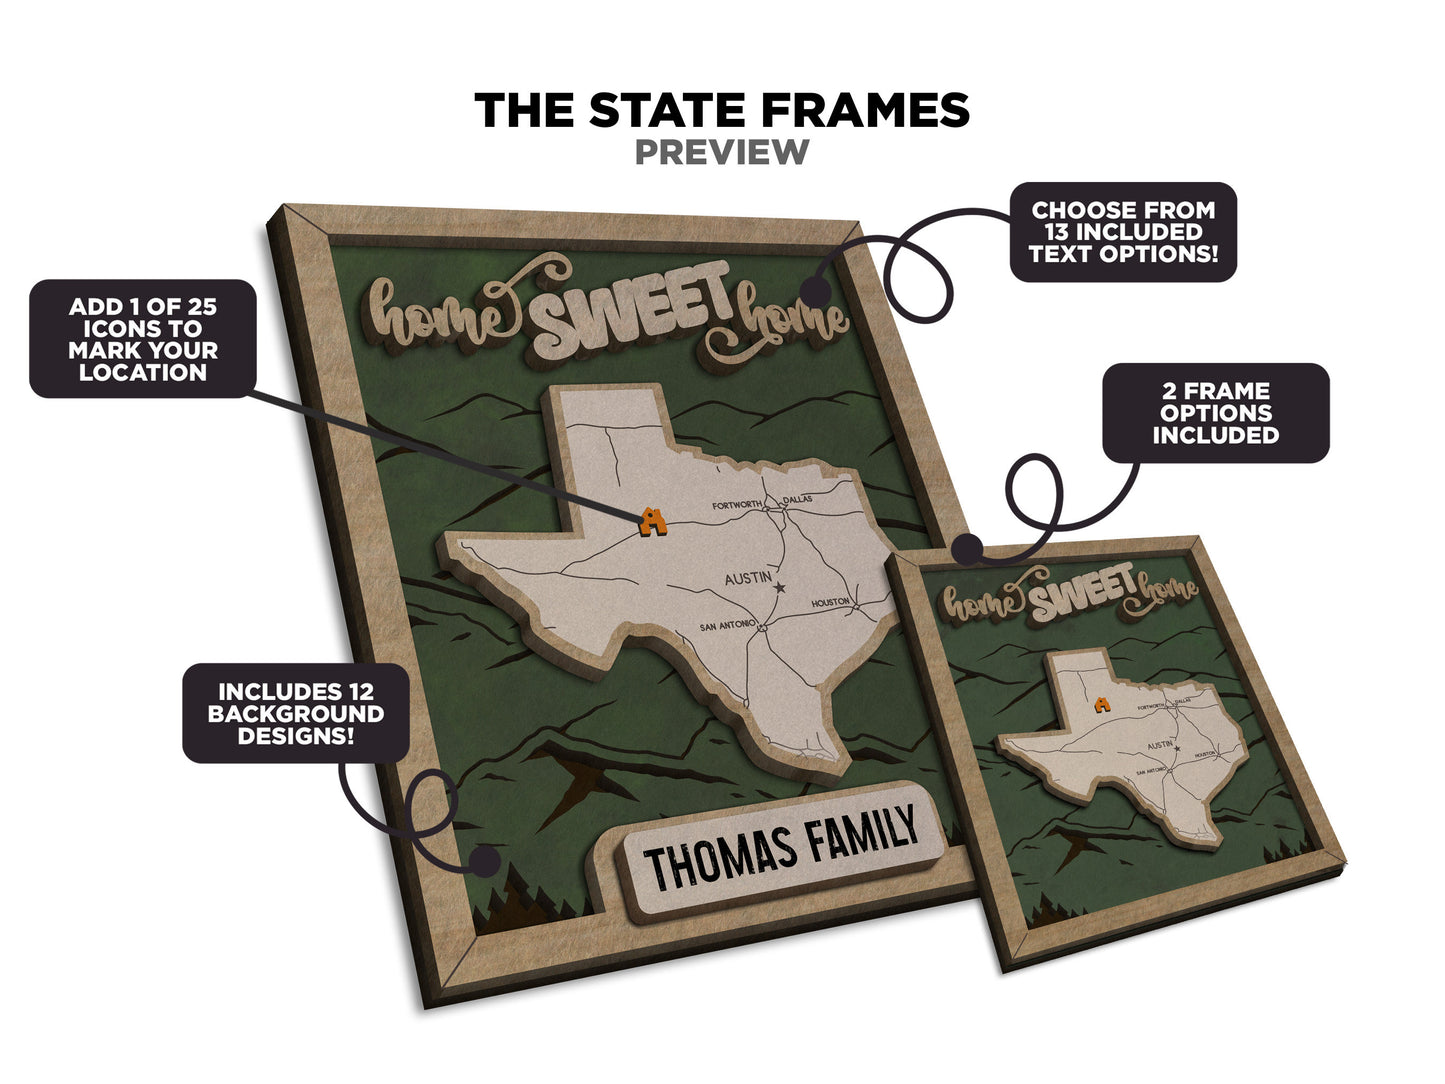 The Massachusetts State Frame - 13 text options, 12 backgrounds, 25 icons Included - Make over 7,500 designs - Glowforge & Lightburn Tested